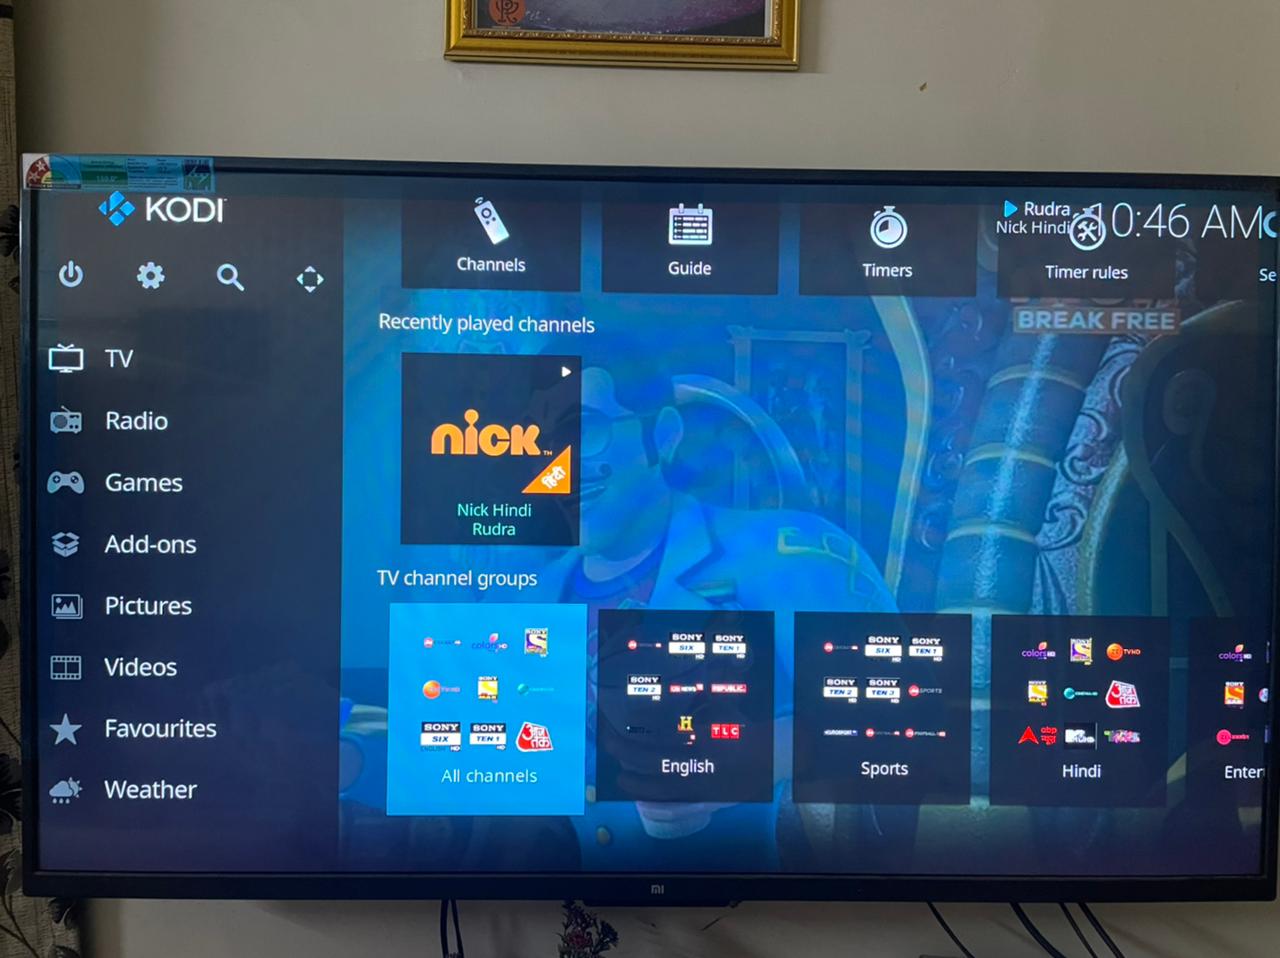 jio tv app android tv